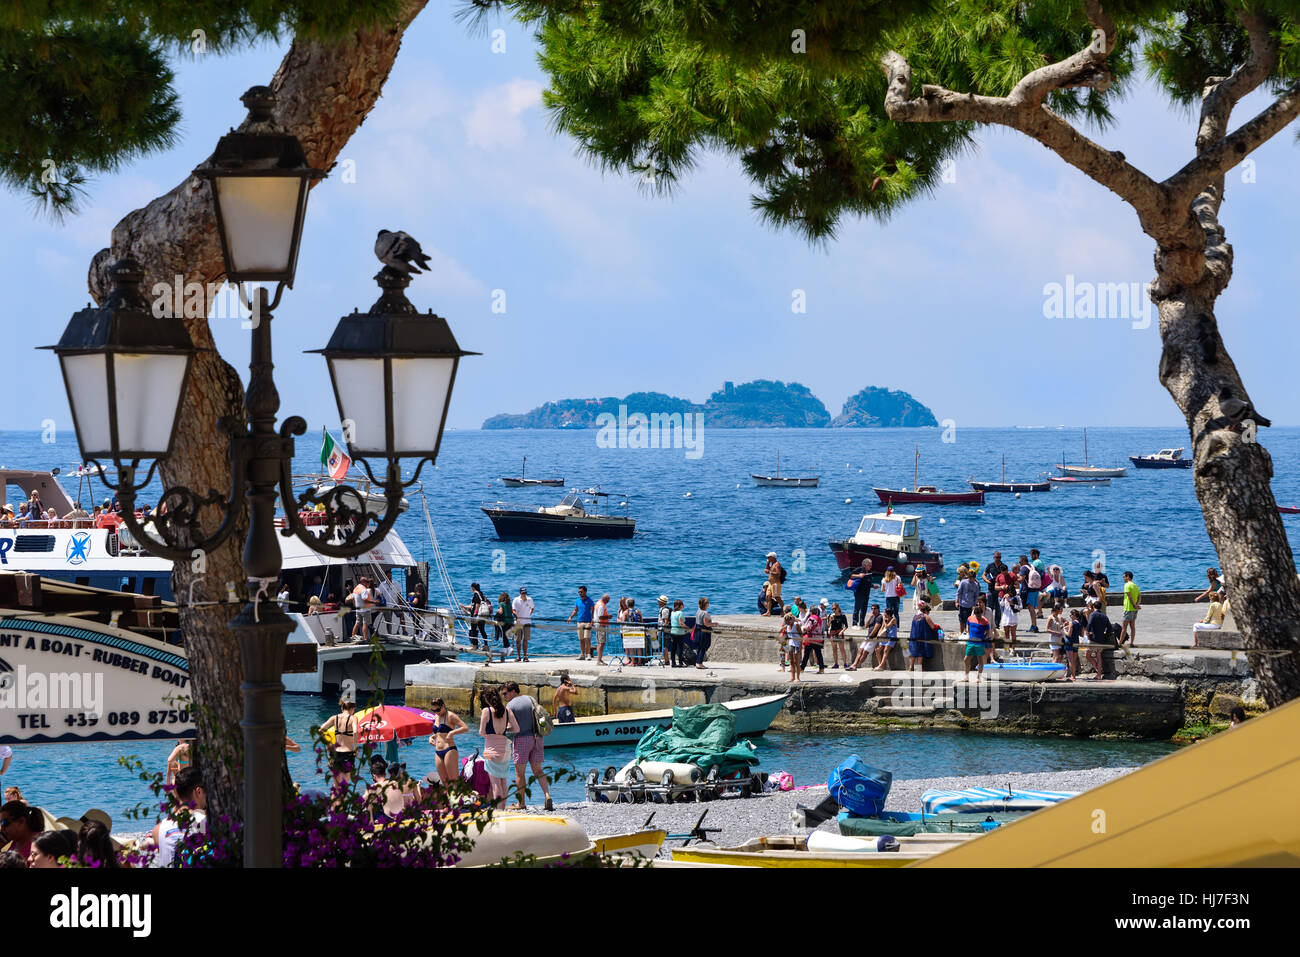 Tourists gather at a boat marina for boat tours along the Amalfi Coastline in Italy. Stock Photo